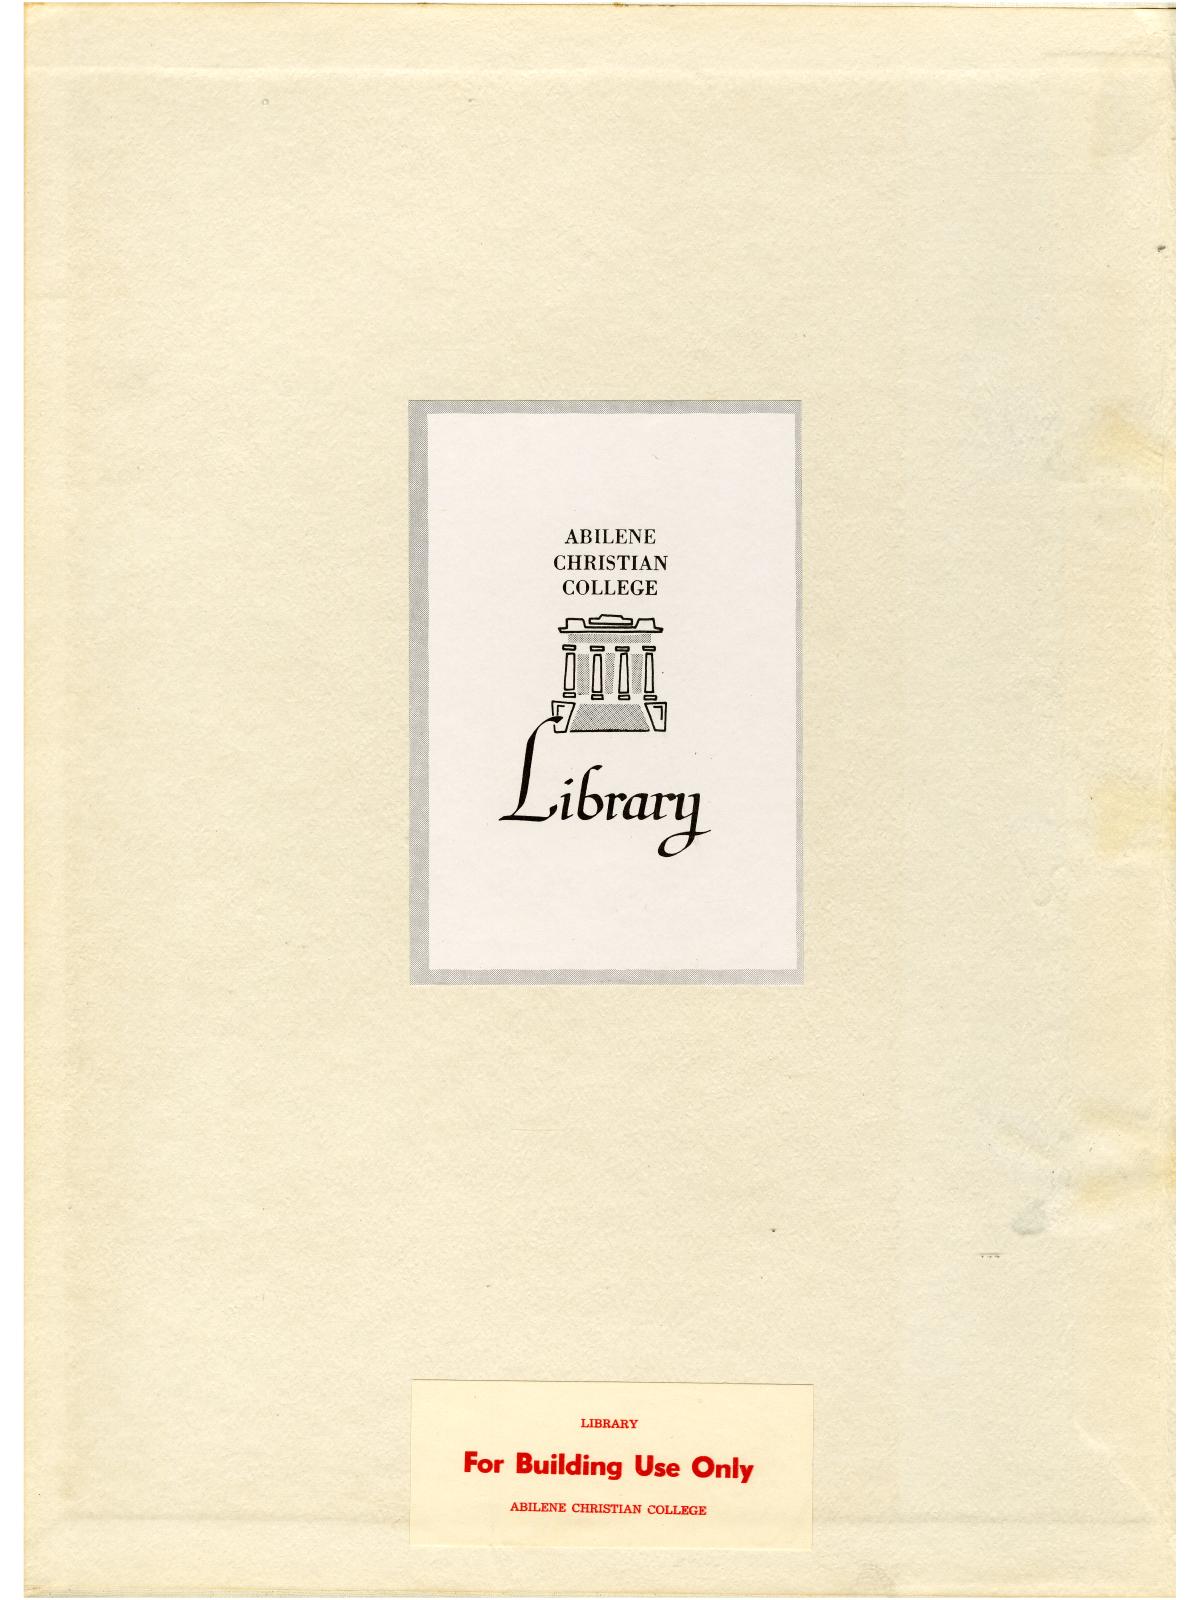 Prickly Pear, Yearbook of Abilene Christian College, 1943
                                                
                                                    Front Inside
                                                